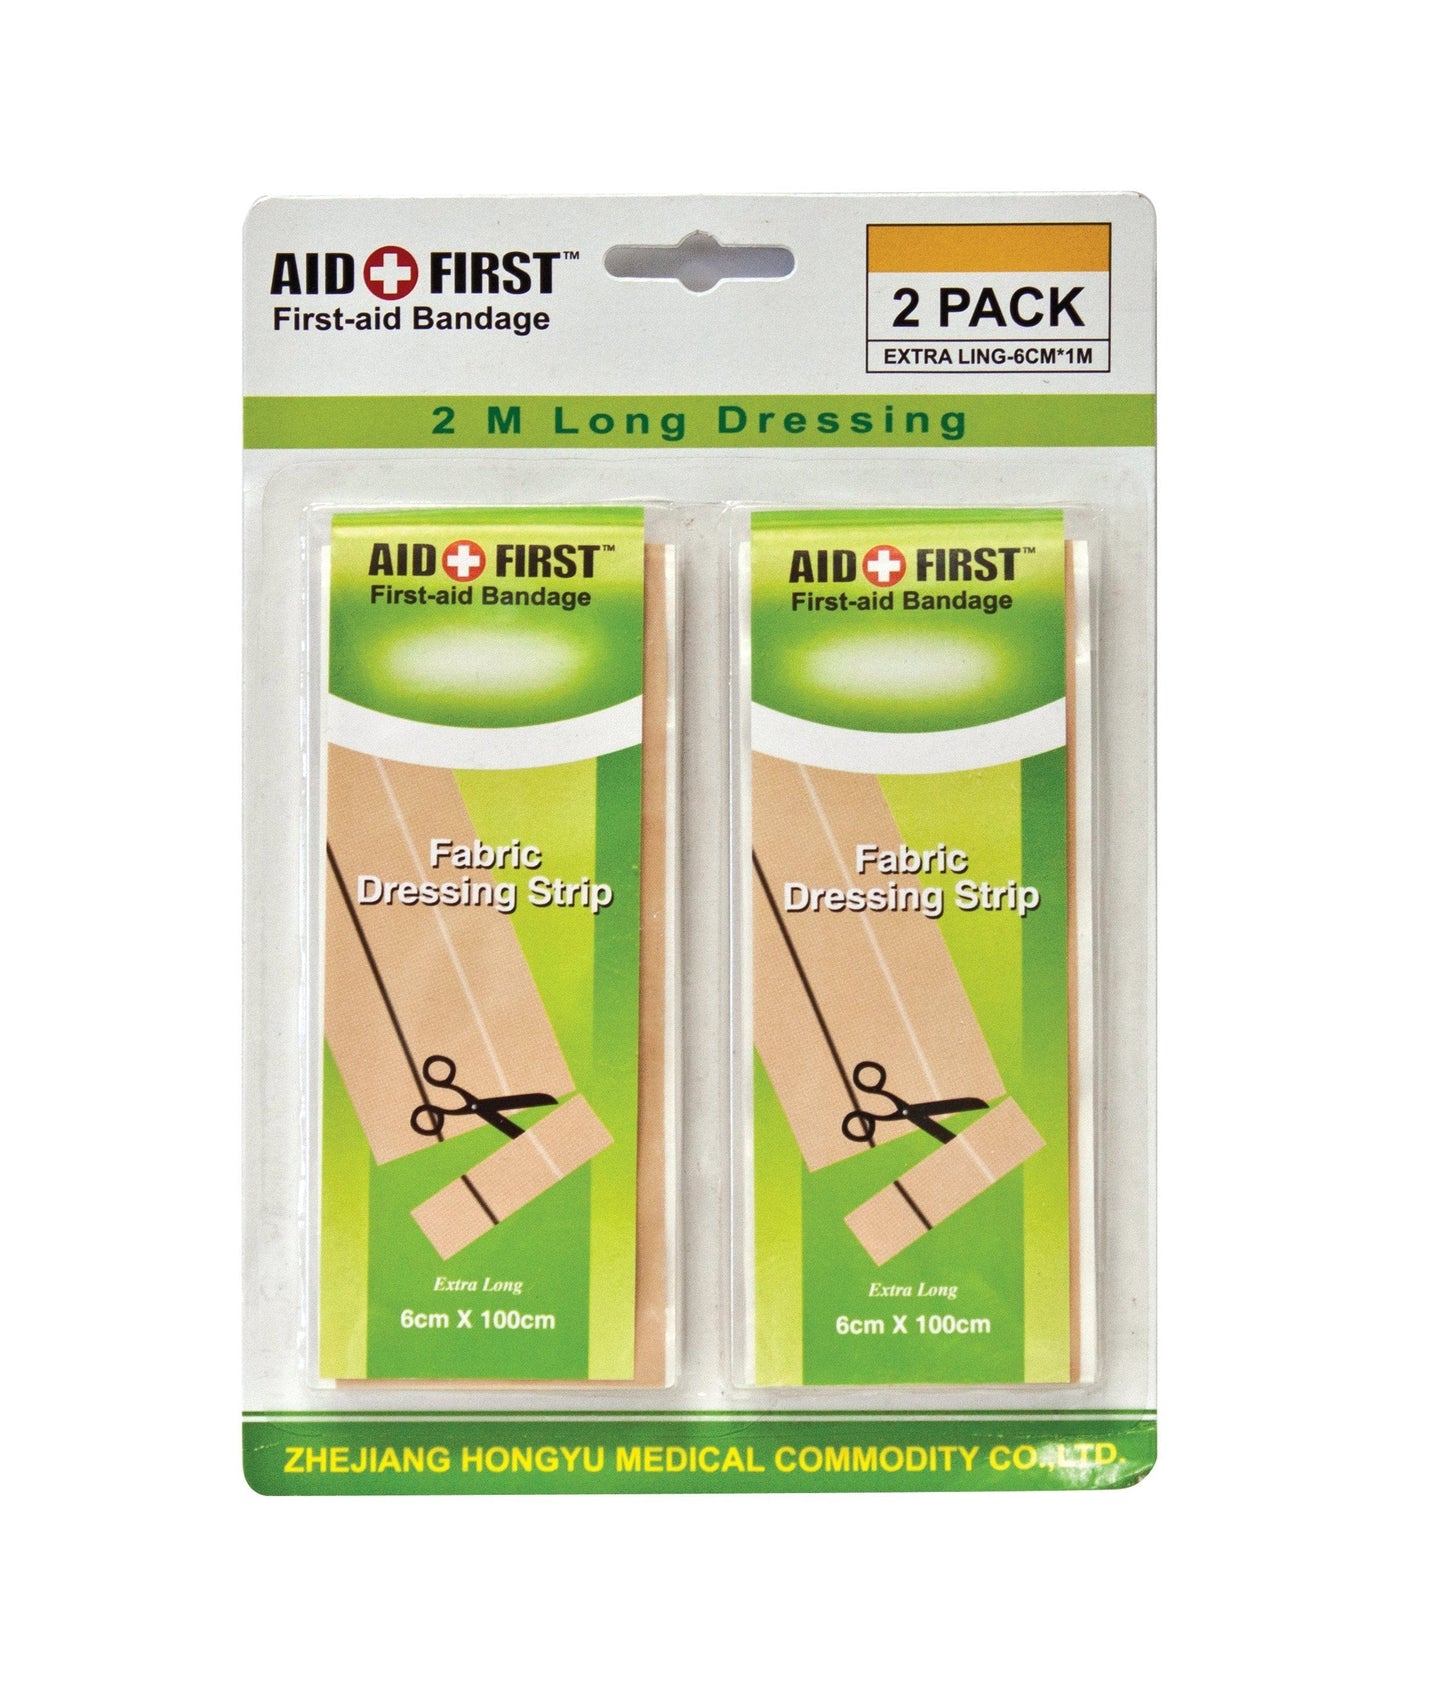 Aid First Plaster Fabric Dressing Strips 2 Pack Cut And Size Extra Long Dressing 6cm x 100cm 2014/HY0874 (Large Letter Rate)